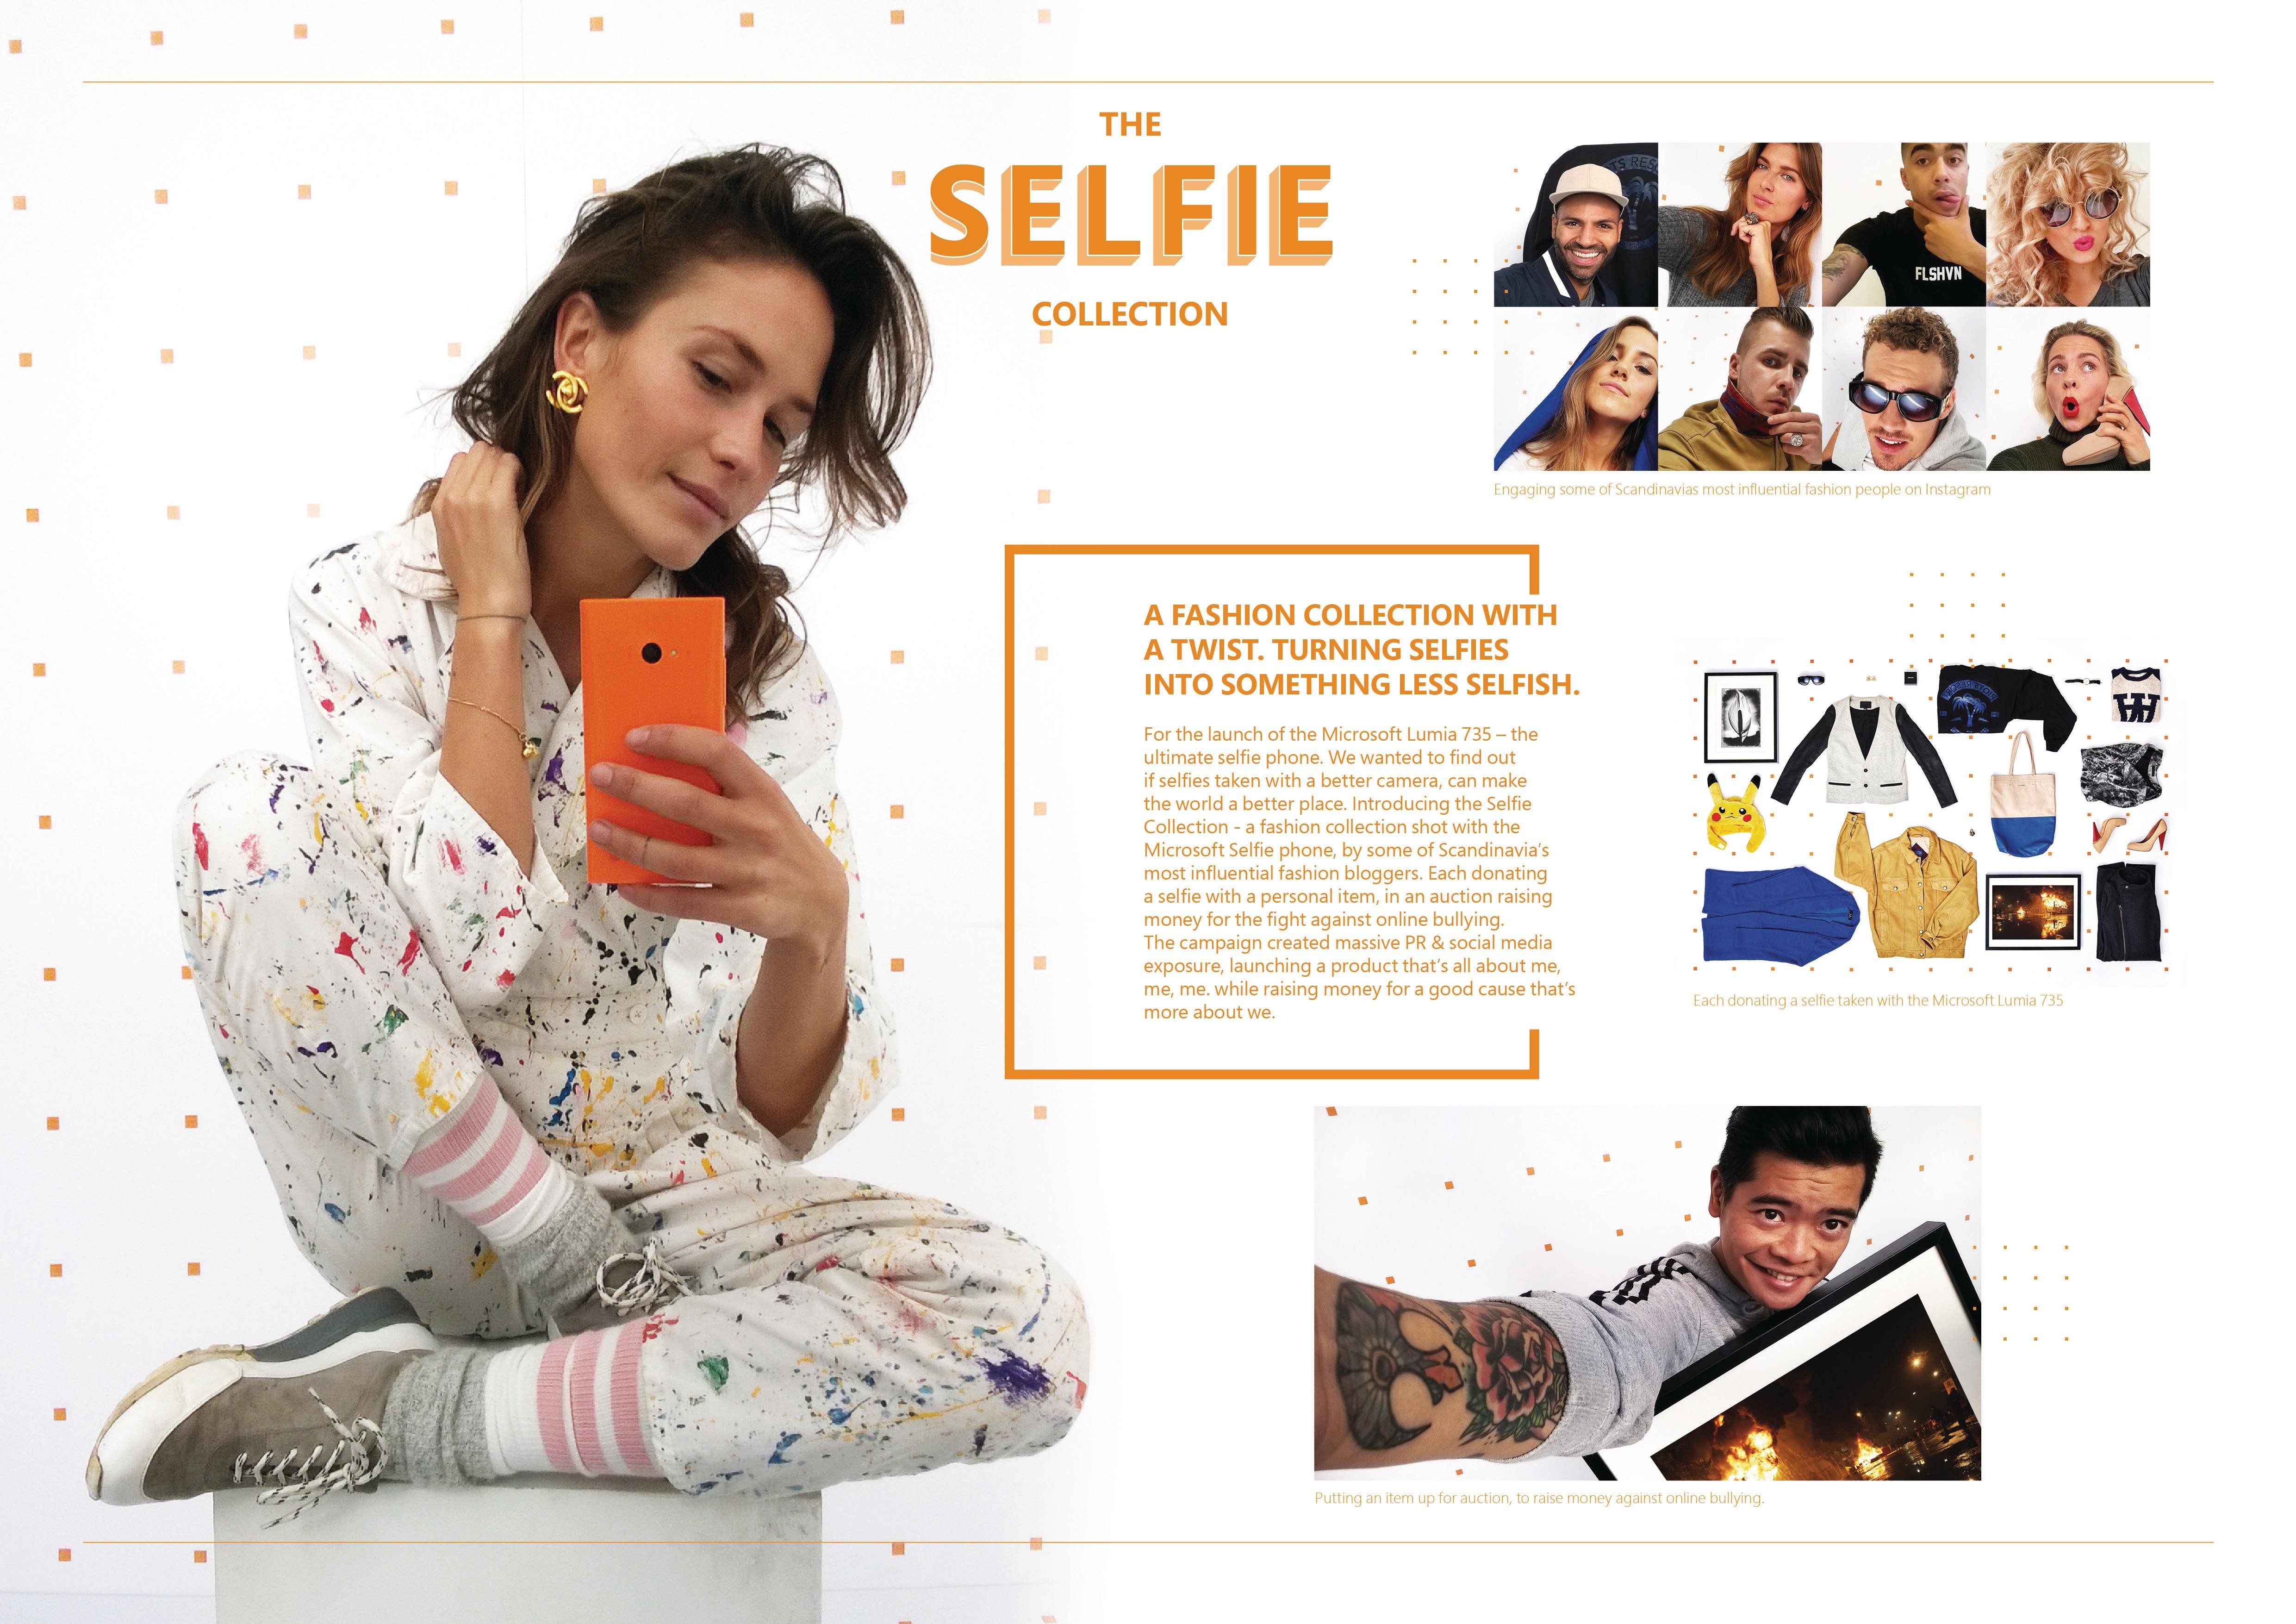 THE SELFIE COLLECTION